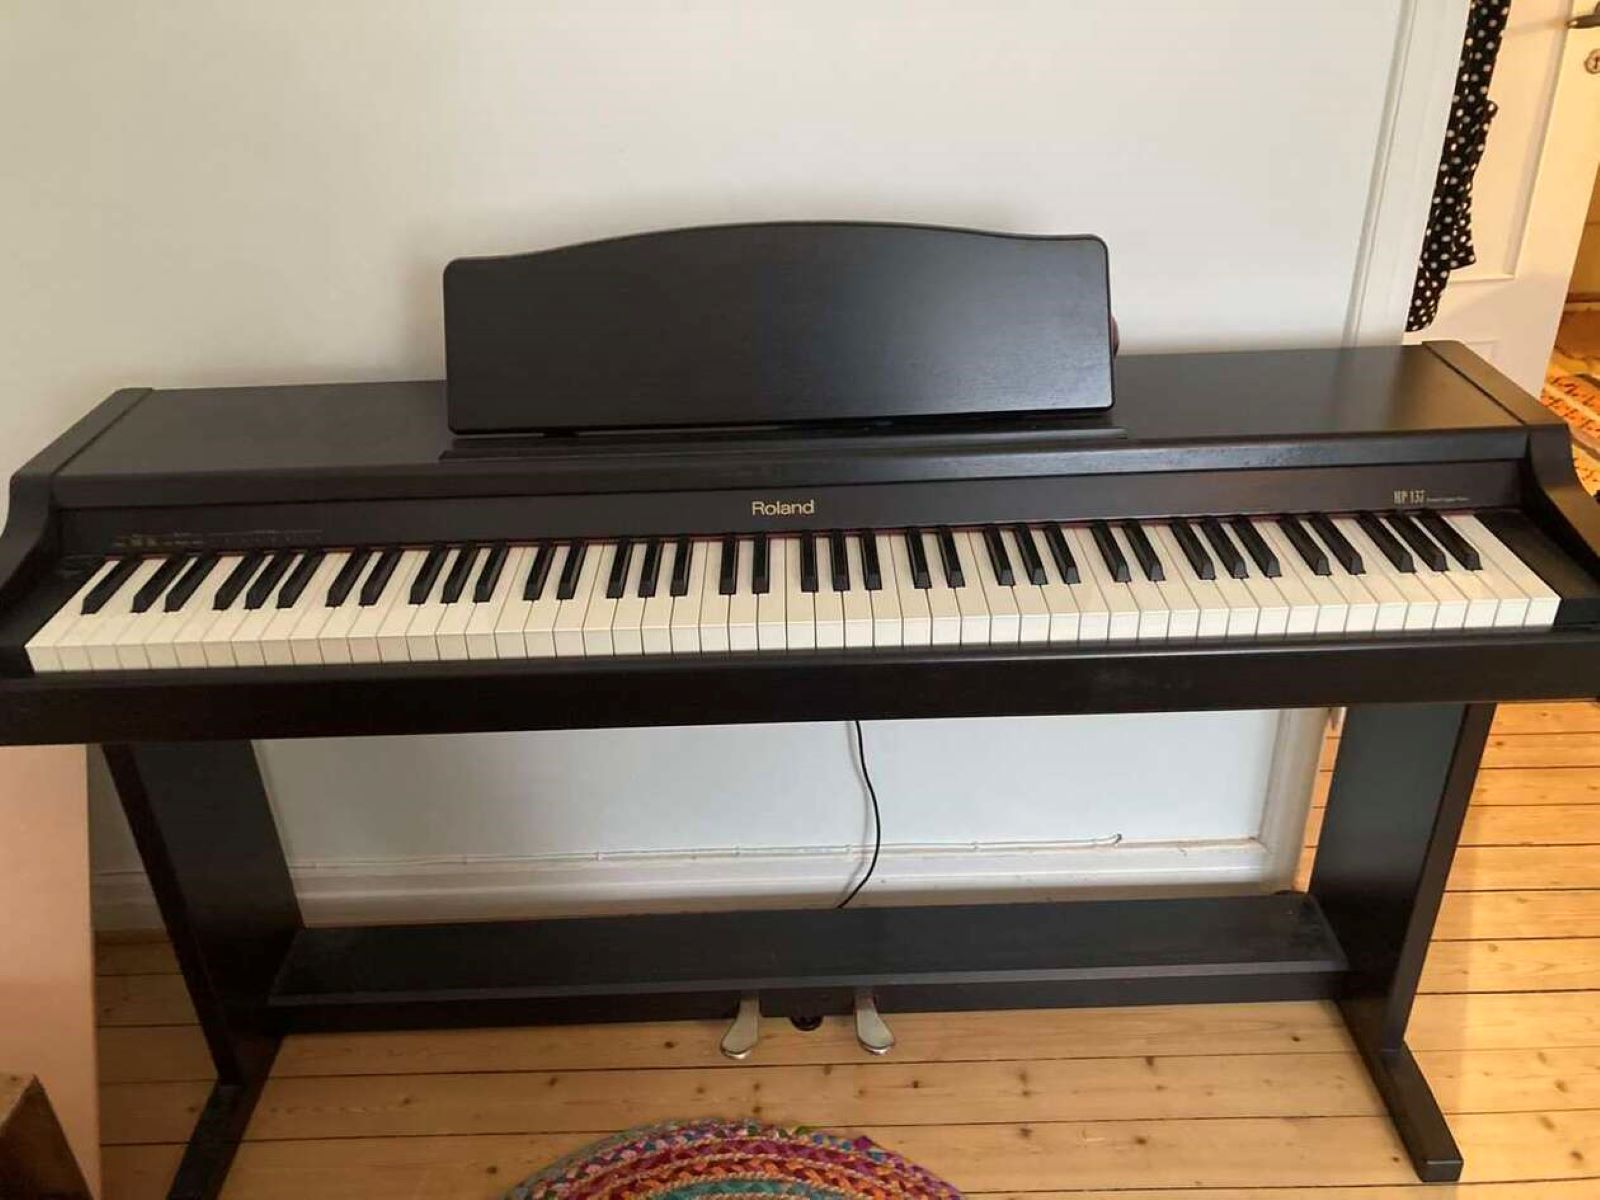 what-is-a-roland-hp-137-digital-piano-worth